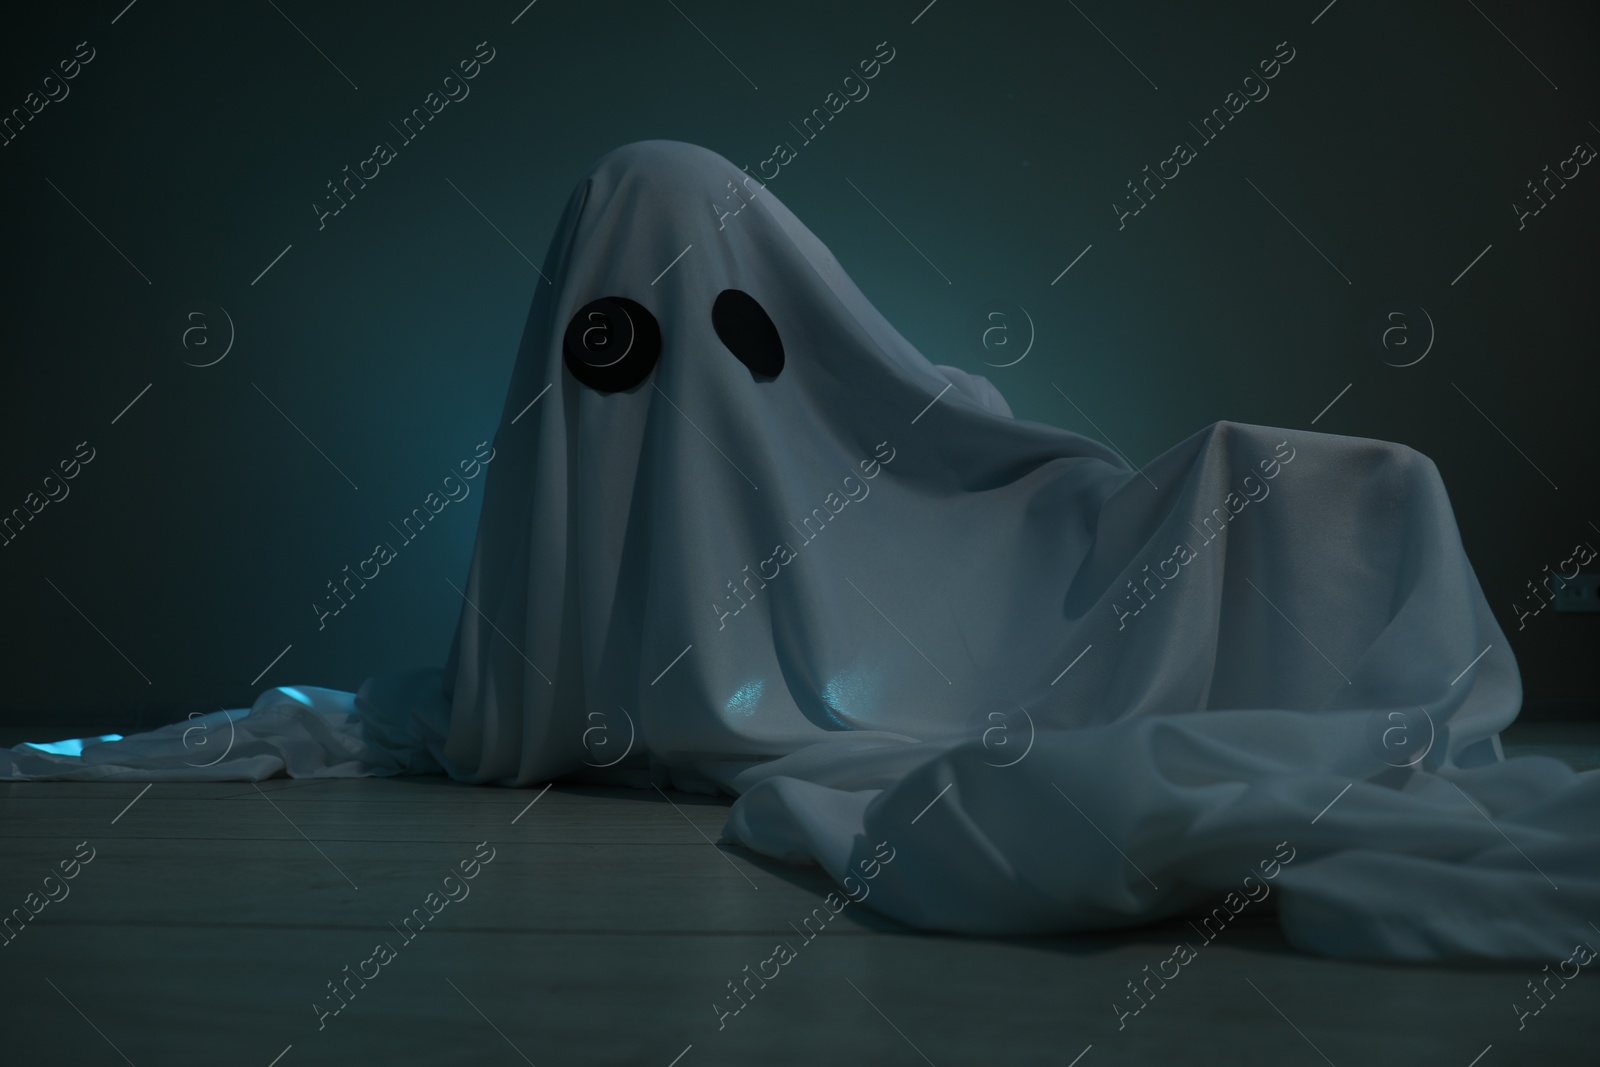 Photo of Creepy ghost. Woman covered with sheet on dark teal background